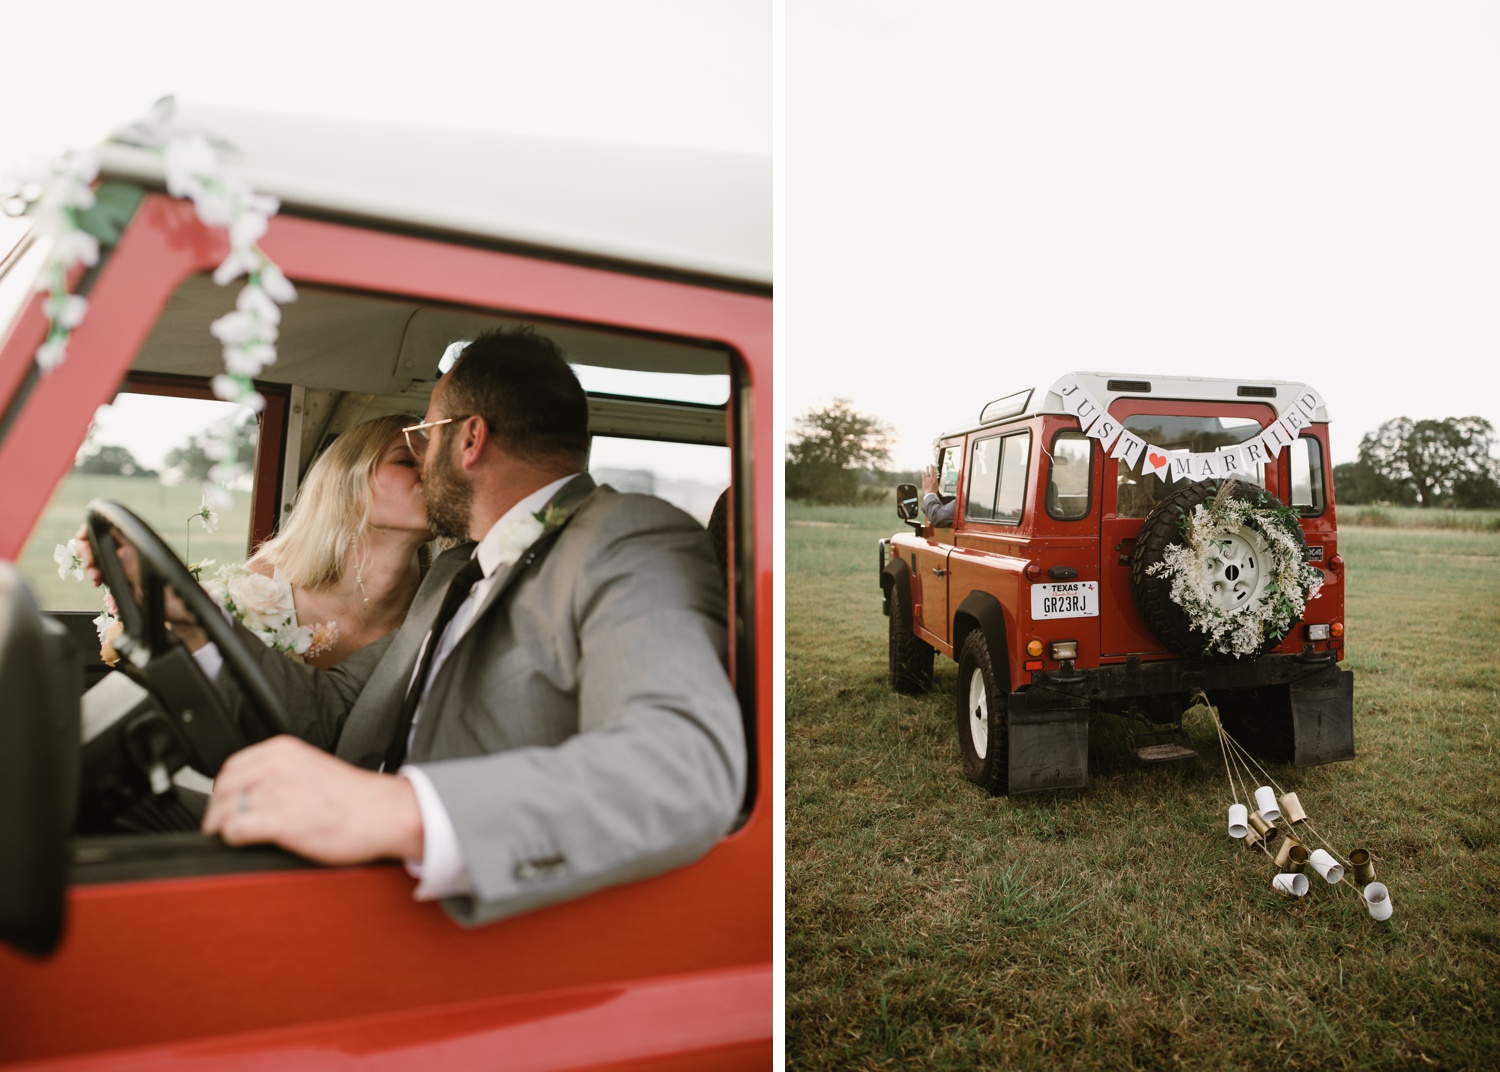 Wedding Jeep decorated with flowers and a 'Just Married' sign